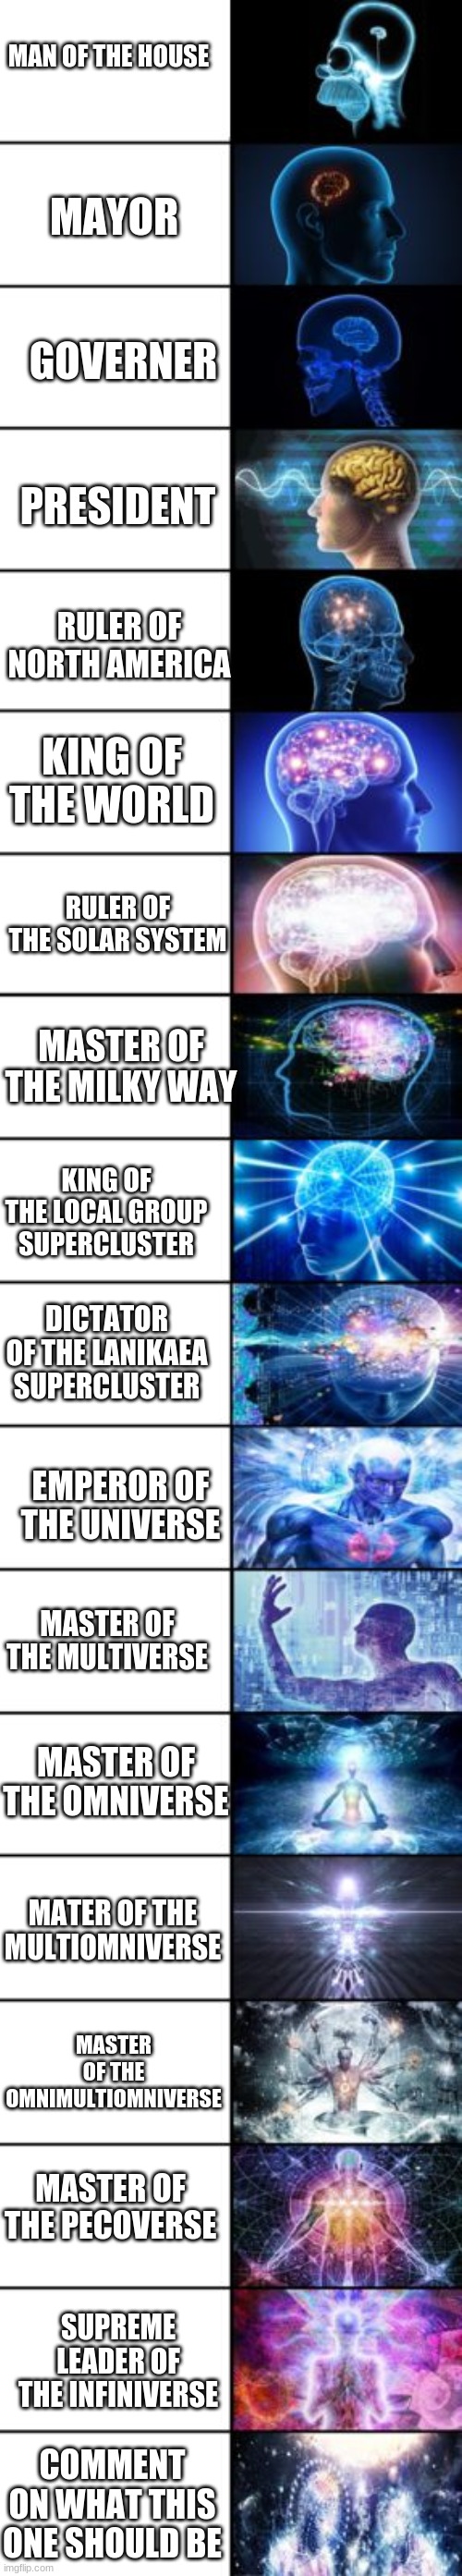 Expanding Brain longest version | MAN OF THE HOUSE; MAYOR; GOVERNER; PRESIDENT; RULER OF NORTH AMERICA; KING OF THE WORLD; RULER OF THE SOLAR SYSTEM; MASTER OF THE MILKY WAY; KING OF THE LOCAL GROUP SUPERCLUSTER; DICTATOR OF THE LANIKAEA SUPERCLUSTER; EMPEROR OF THE UNIVERSE; MASTER OF THE MULTIVERSE; MASTER OF THE OMNIVERSE; MATER OF THE MULTIOMNIVERSE; MASTER OF THE OMNIMULTIOMNIVERSE; MASTER OF THE PECOVERSE; SUPREME LEADER OF THE INFINIVERSE; COMMENT ON WHAT THIS ONE SHOULD BE | image tagged in expanding brain longest version | made w/ Imgflip meme maker